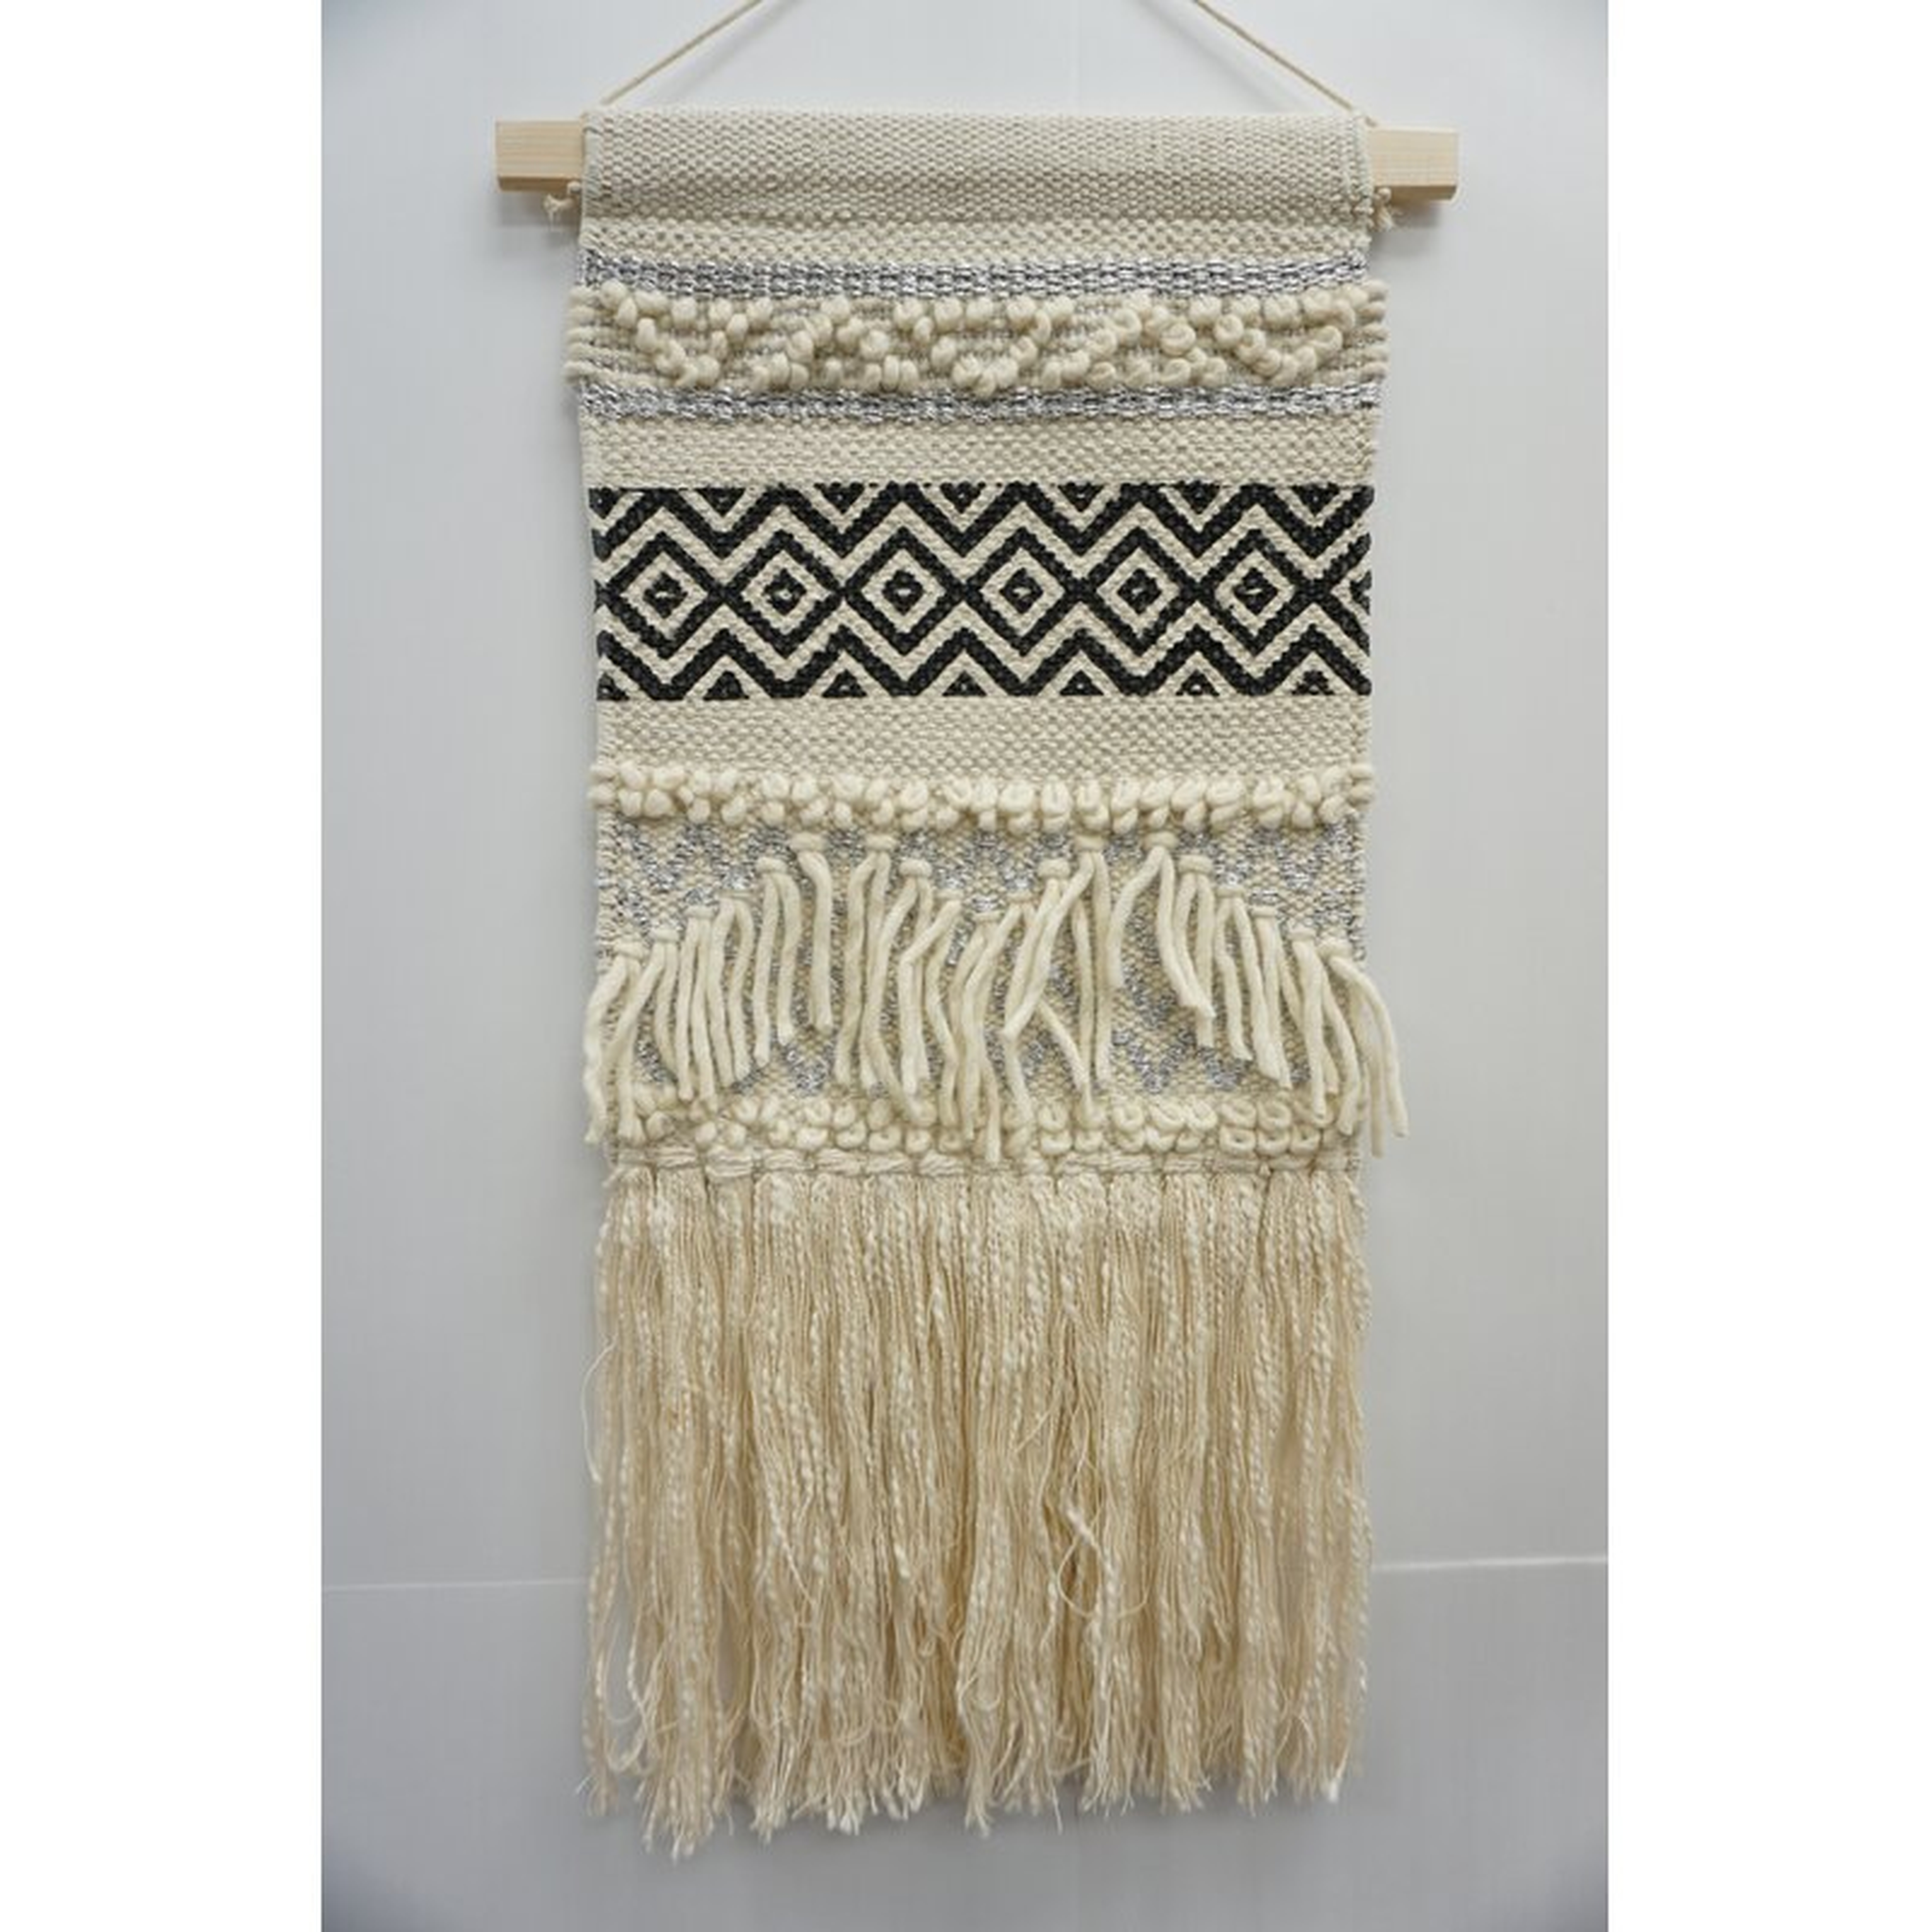 Wool Wall Hanging with Hanging Accessories and Rod Included - Wayfair